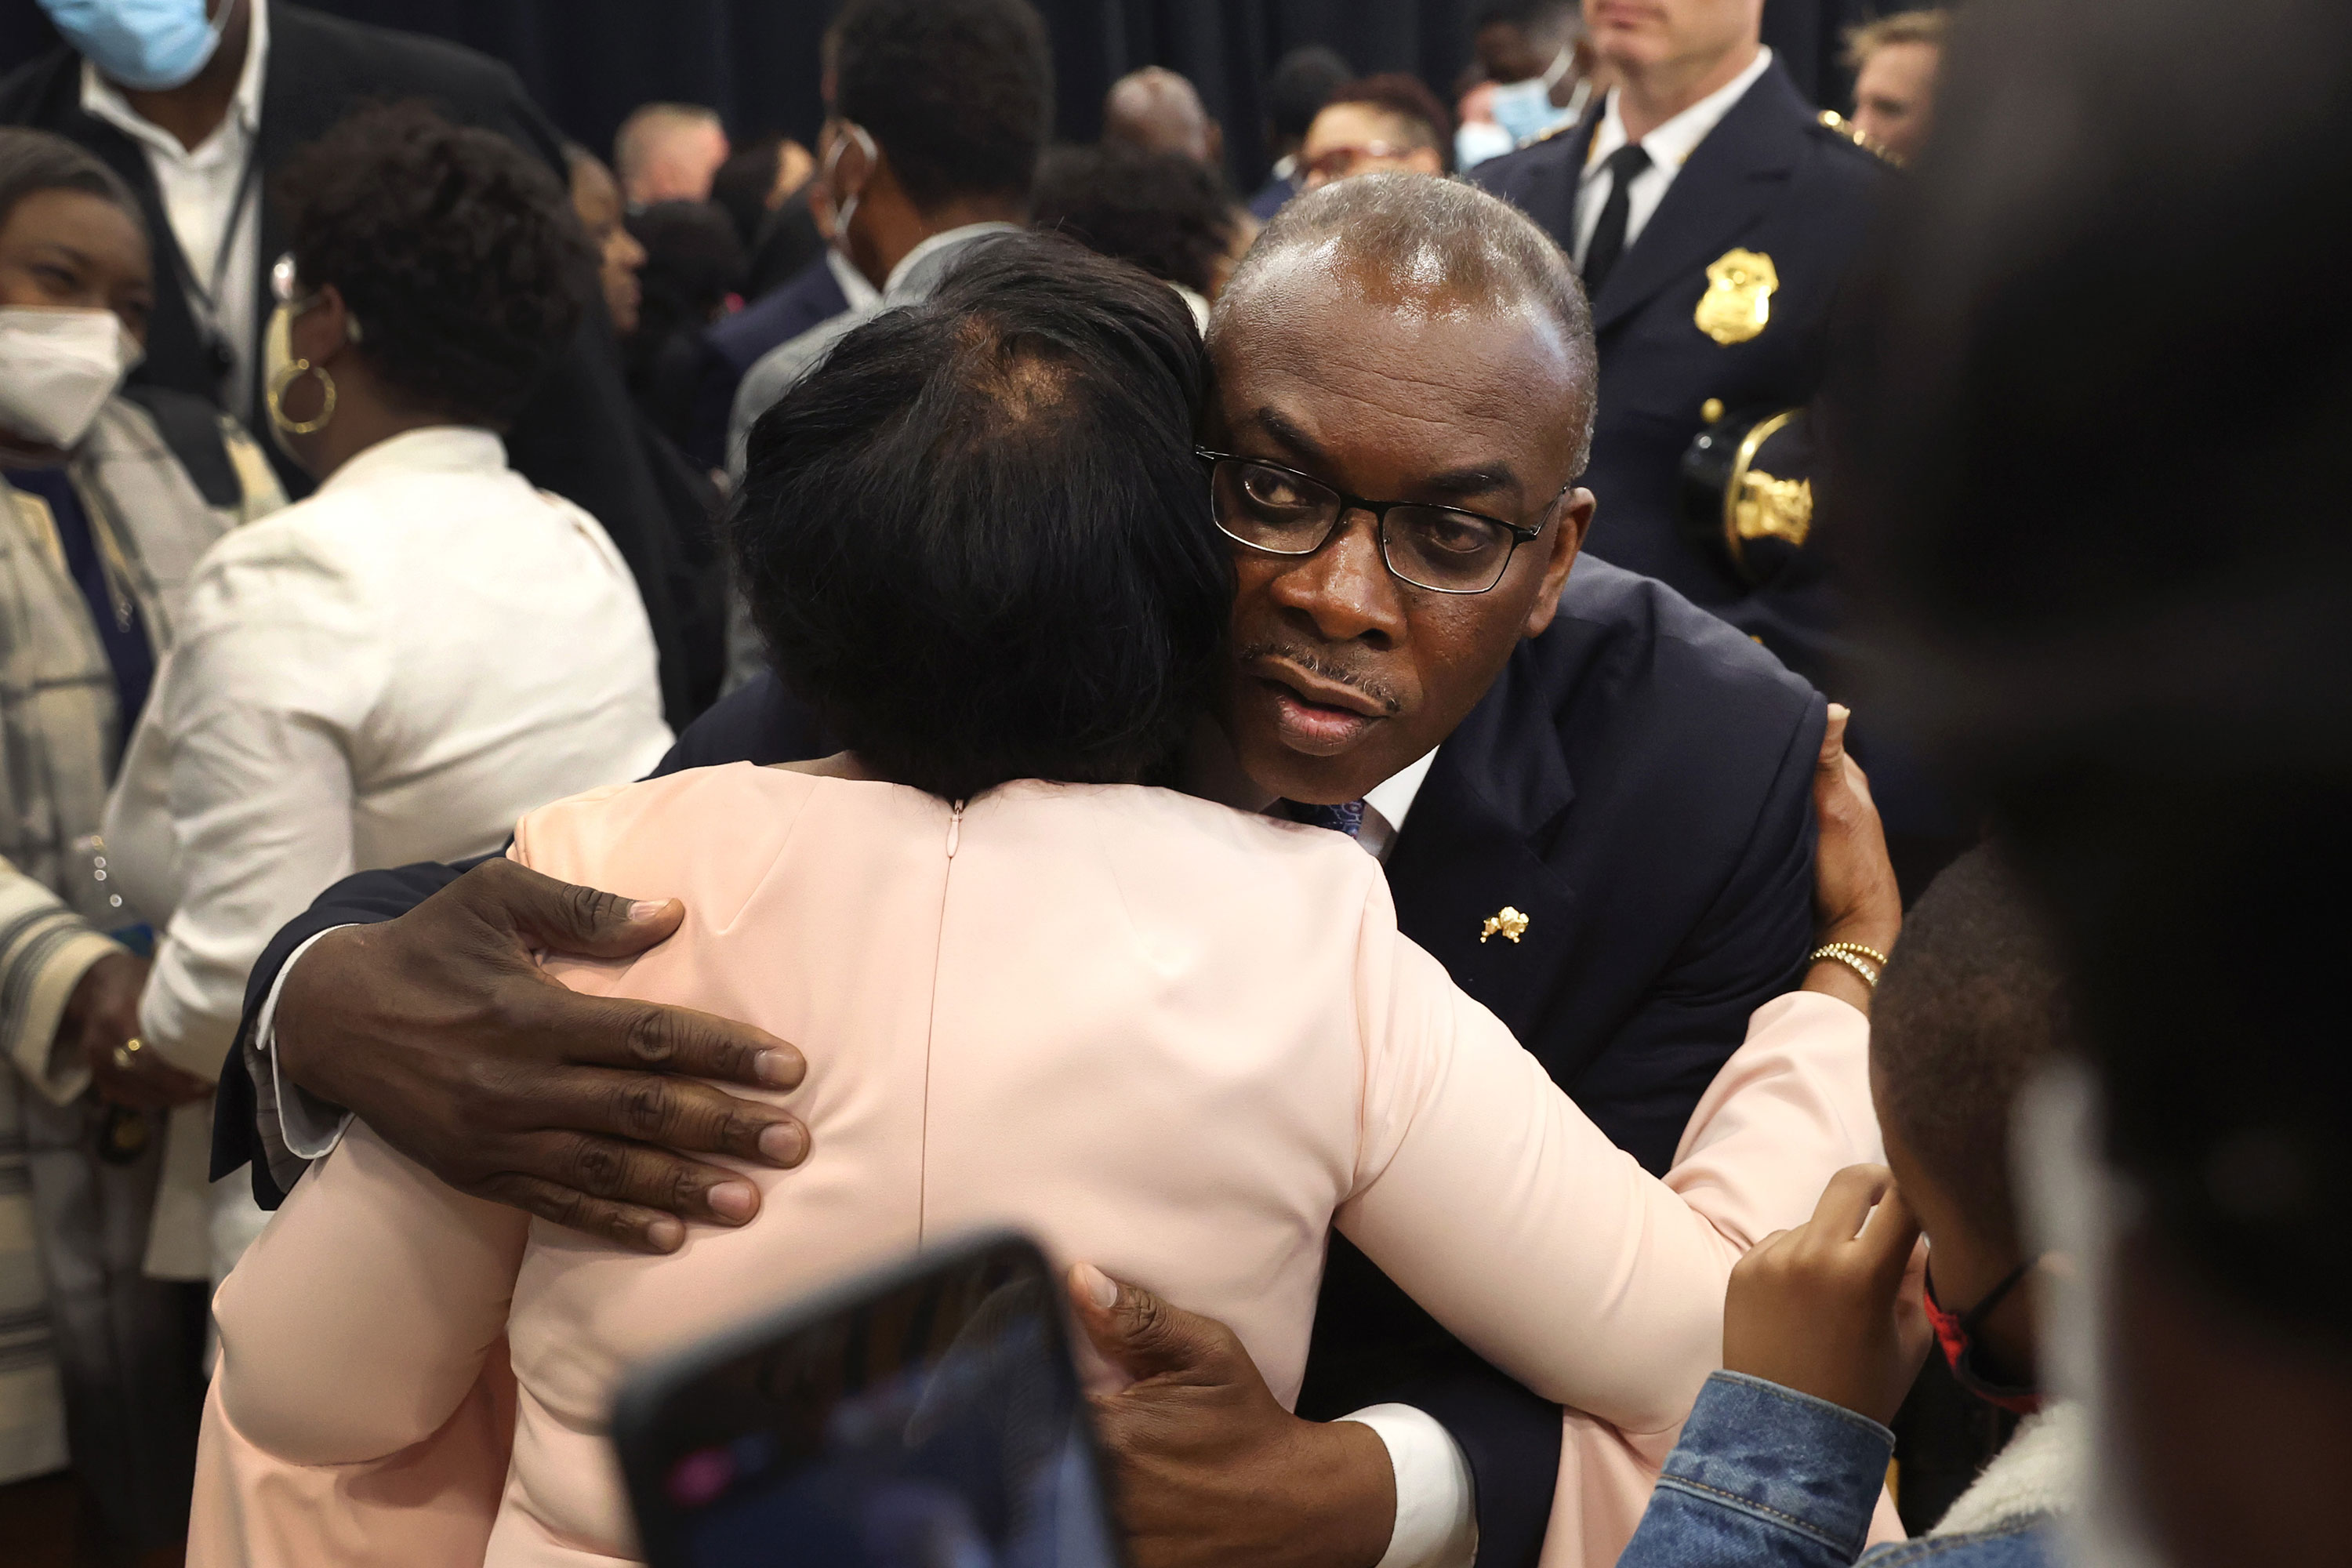 Mayor Byron Brown greets family members of victims of the Tops Friendly Market shooting in Buffalo on Tuesday.